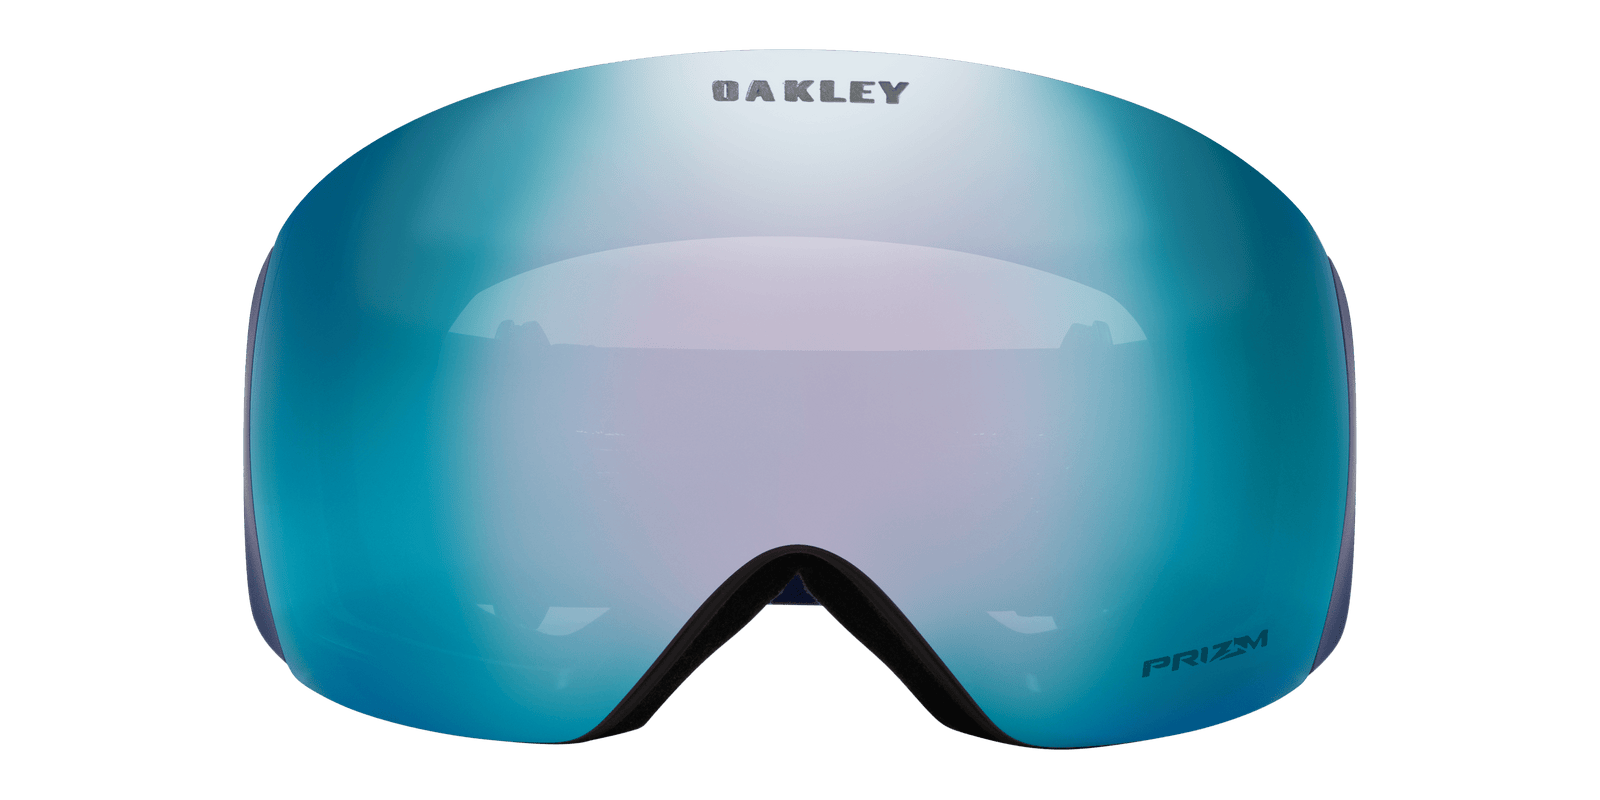 Buy Oakley Sunglasses & Goggles online in Canada at Freeride 